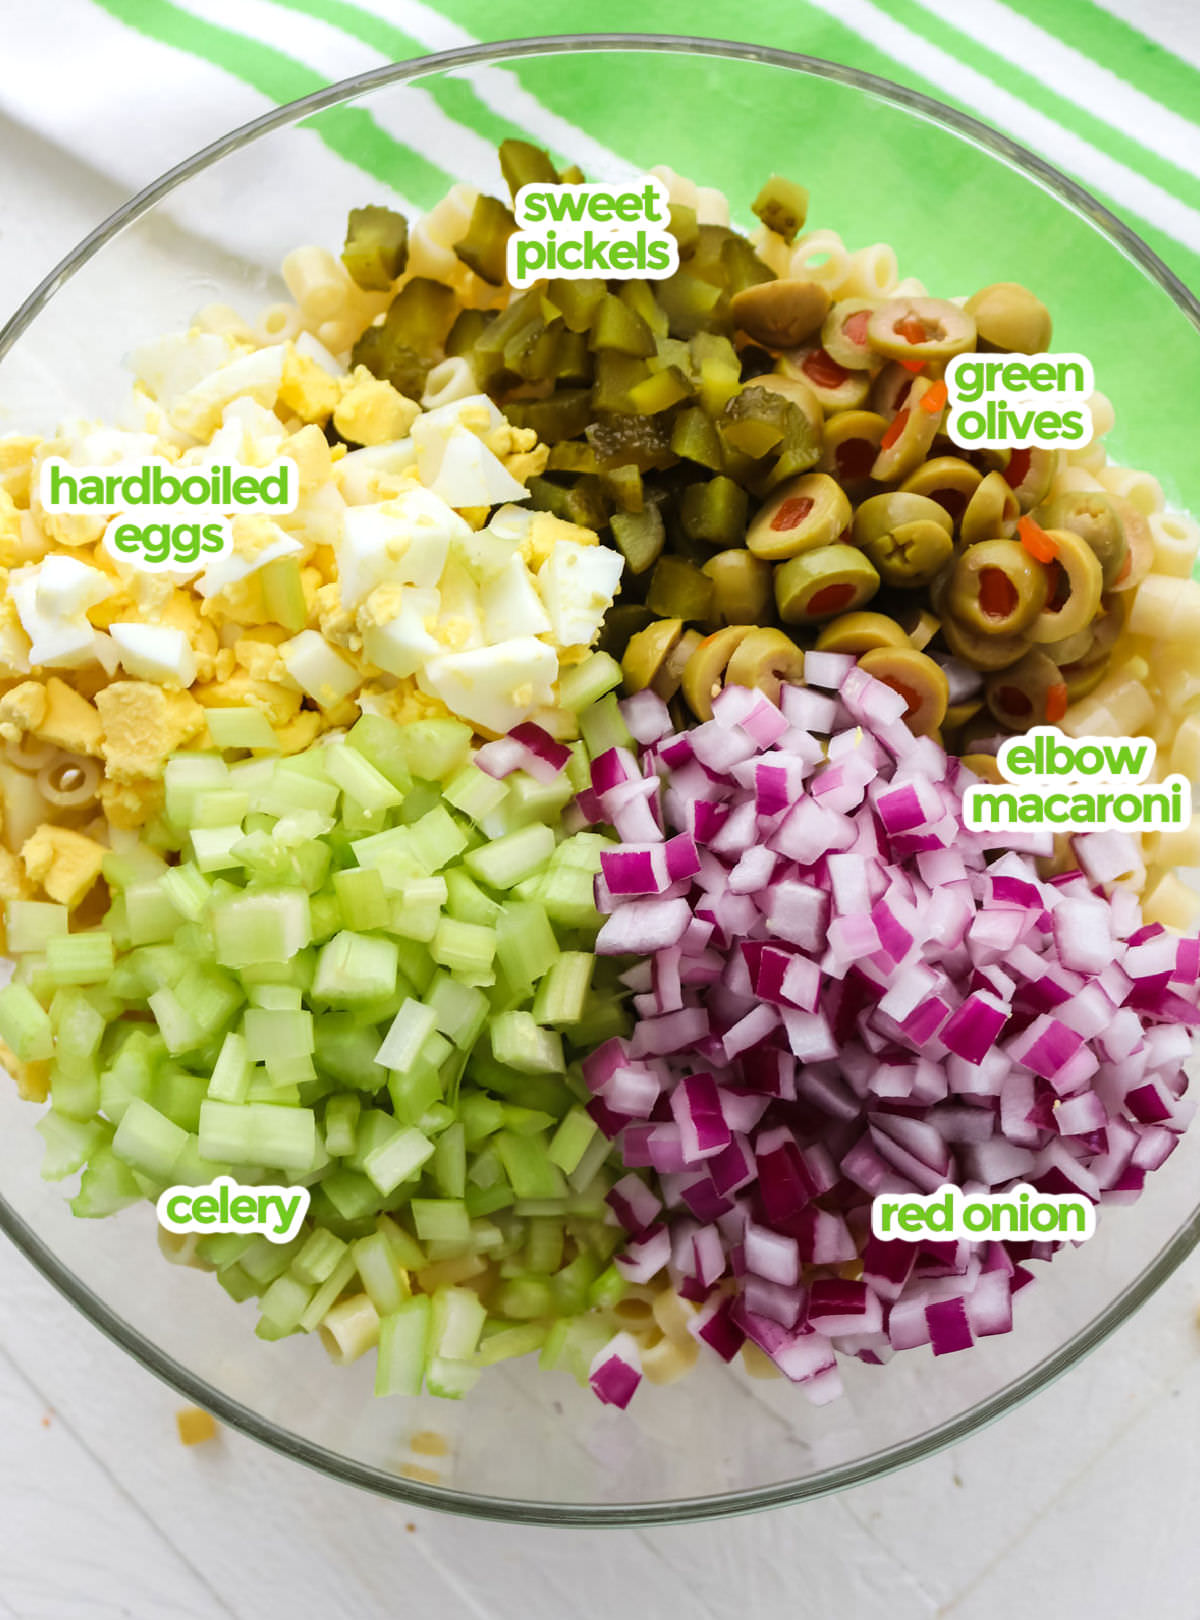 All the ingredients you will need to make Classic Macaroni Salad including short macaroni pasta, sweet pickels, green olives, red onion, celery, and hardboiled eggs.